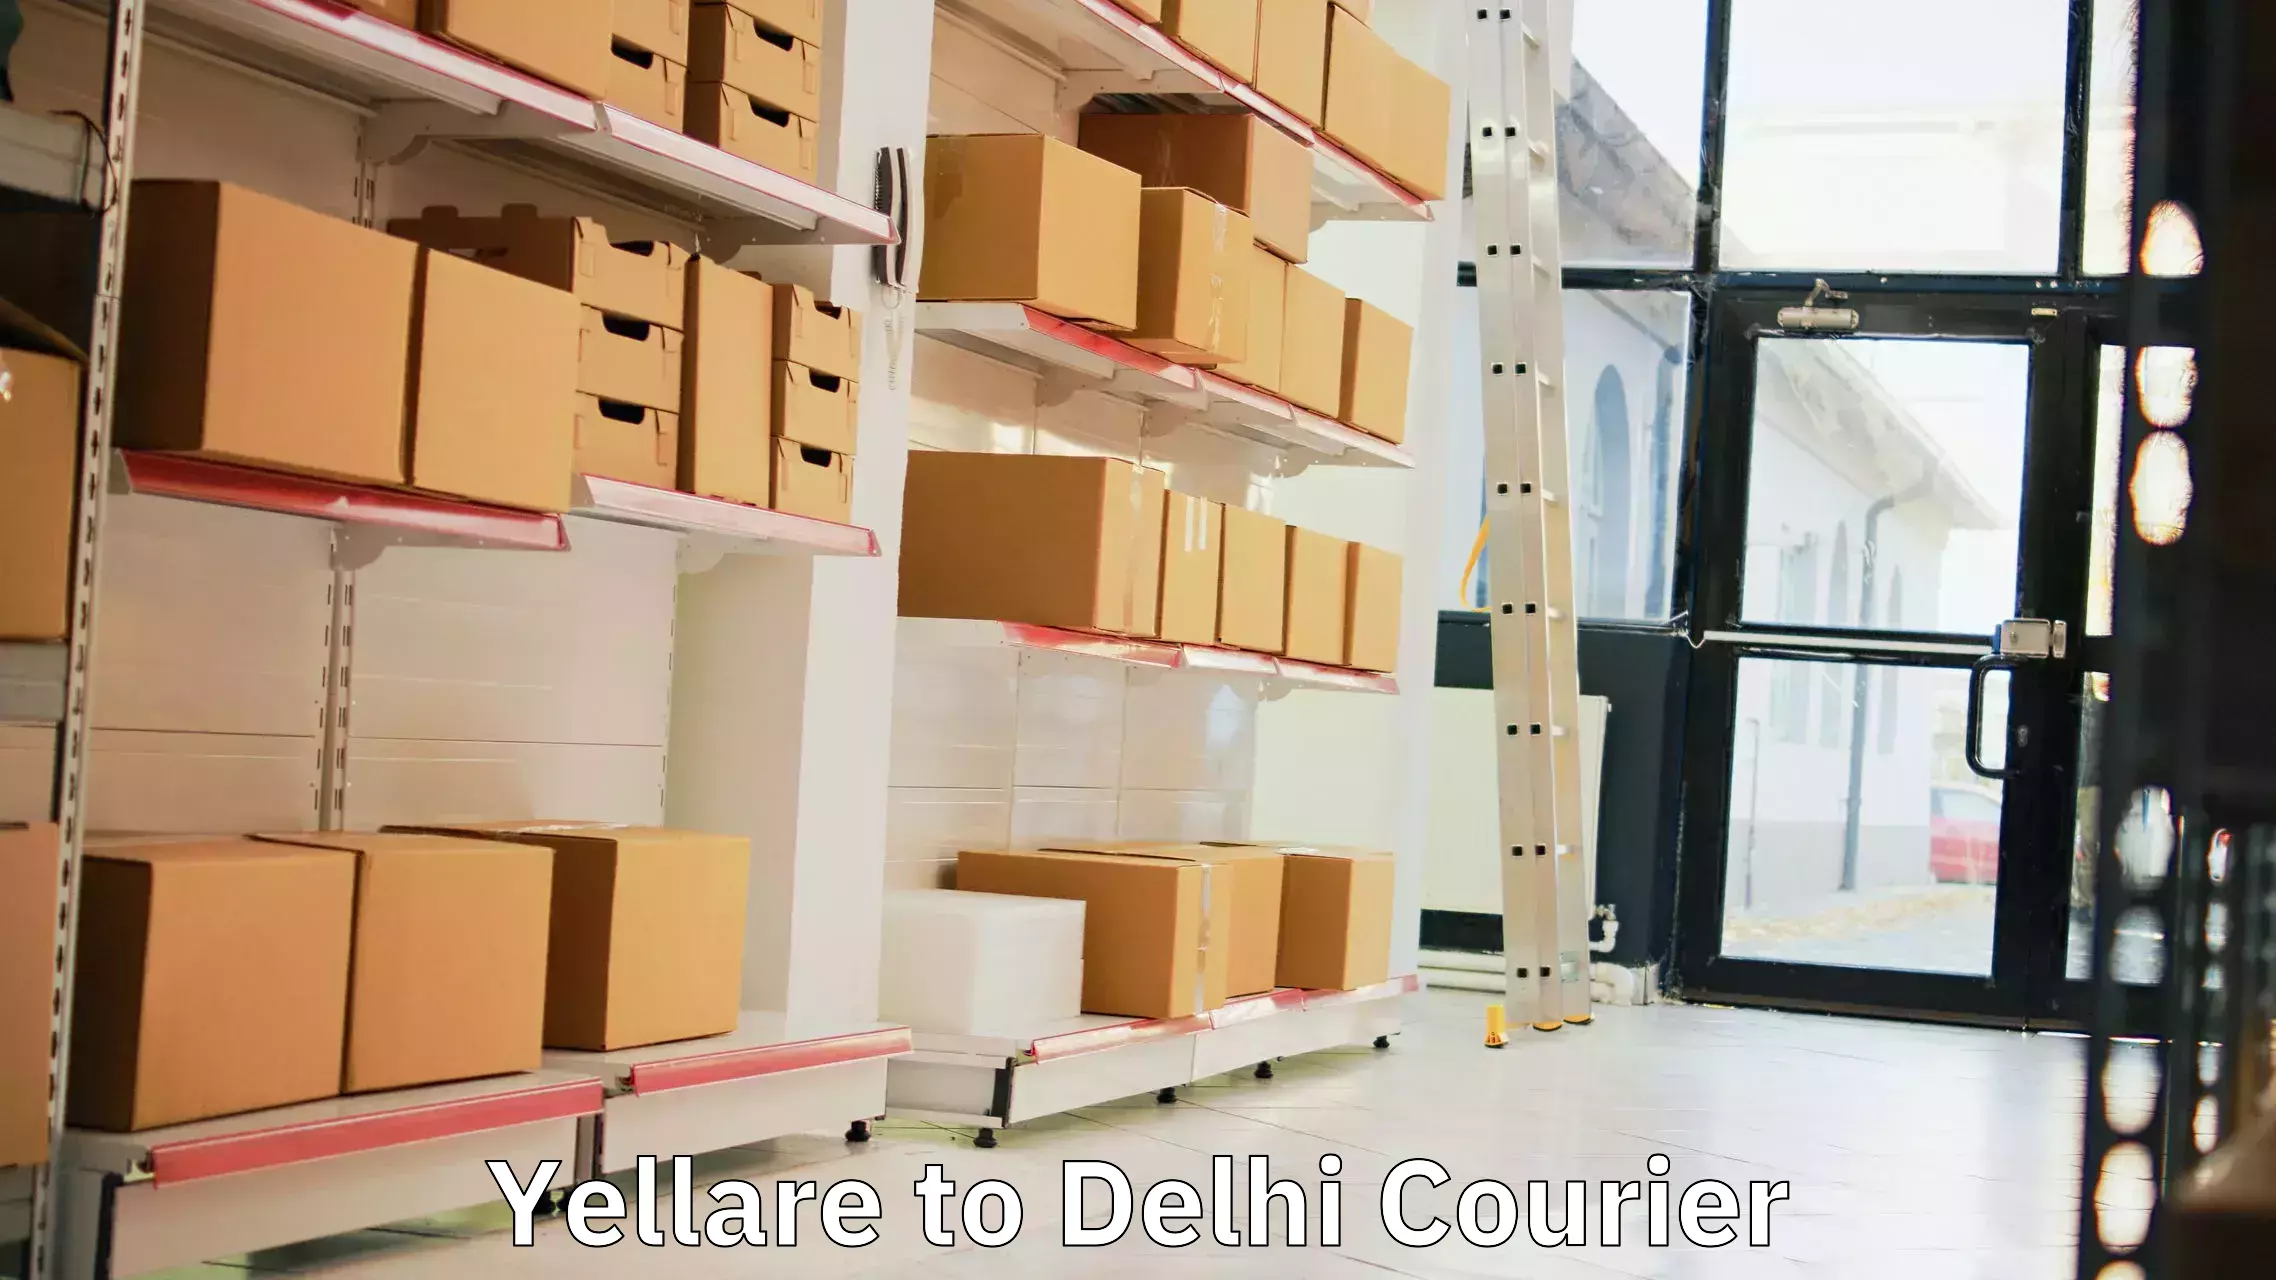 Express delivery capabilities Yellare to NCR